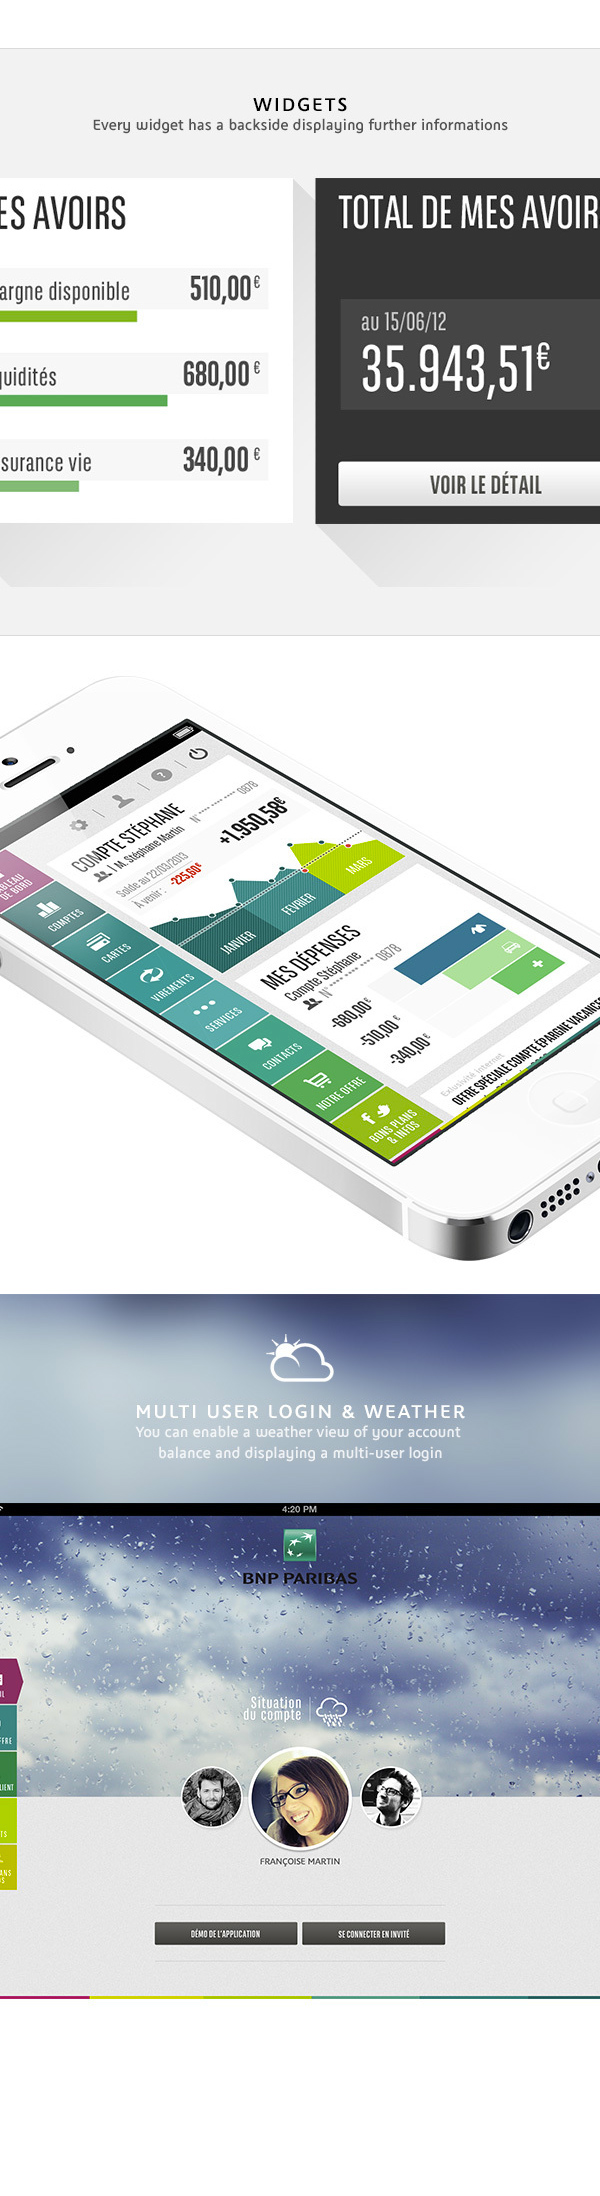 iphone app Android App banking account data visualization Bank bnp